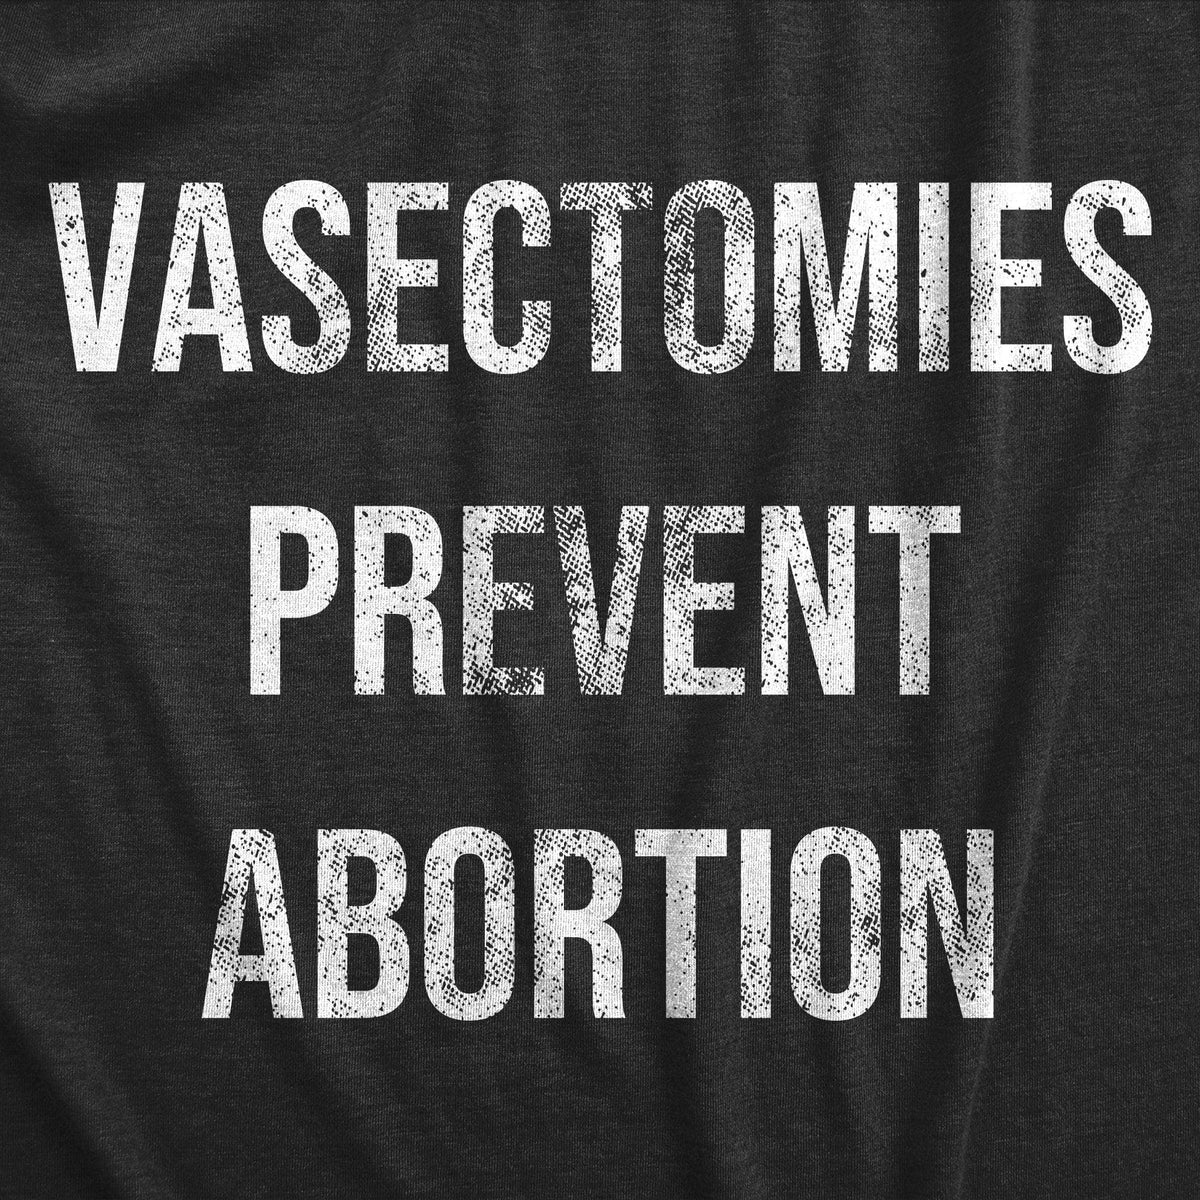 Vasectomies Prevent Abortion Women&#39;s Tshirt  -  Crazy Dog T-Shirts